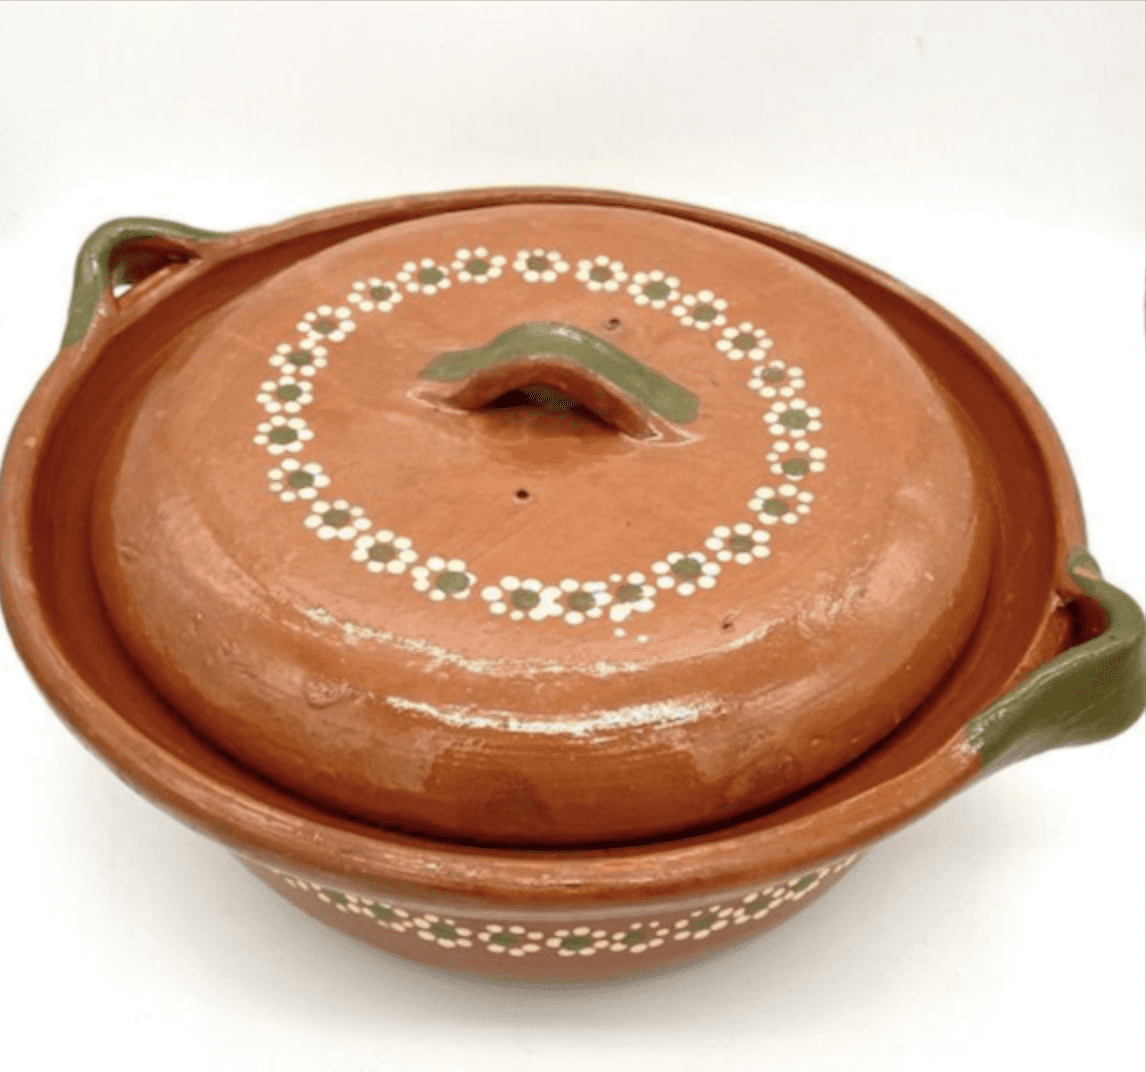 18 Essential Mexican Cooking Utensils